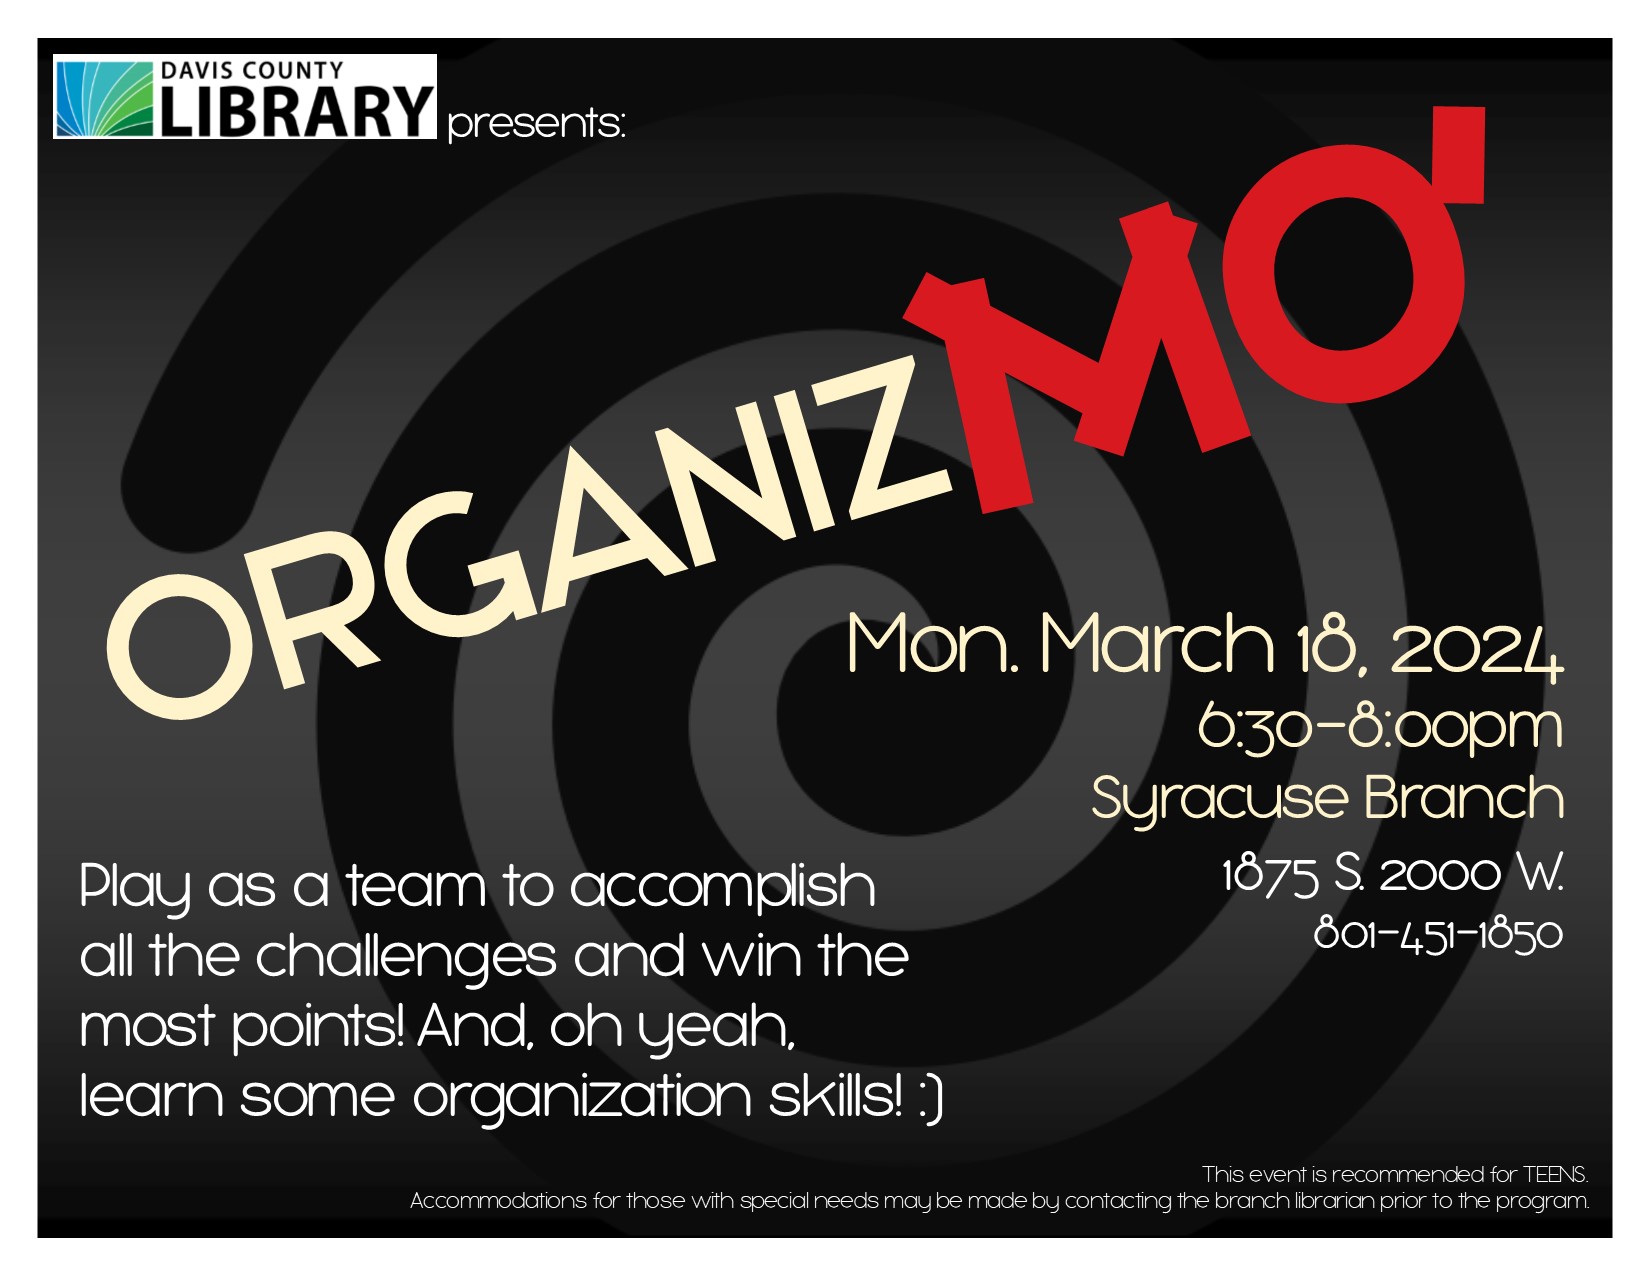 Play as a team to accomplish all the challenges and win the most points! And, oh yeah, learn some organization skills! :)